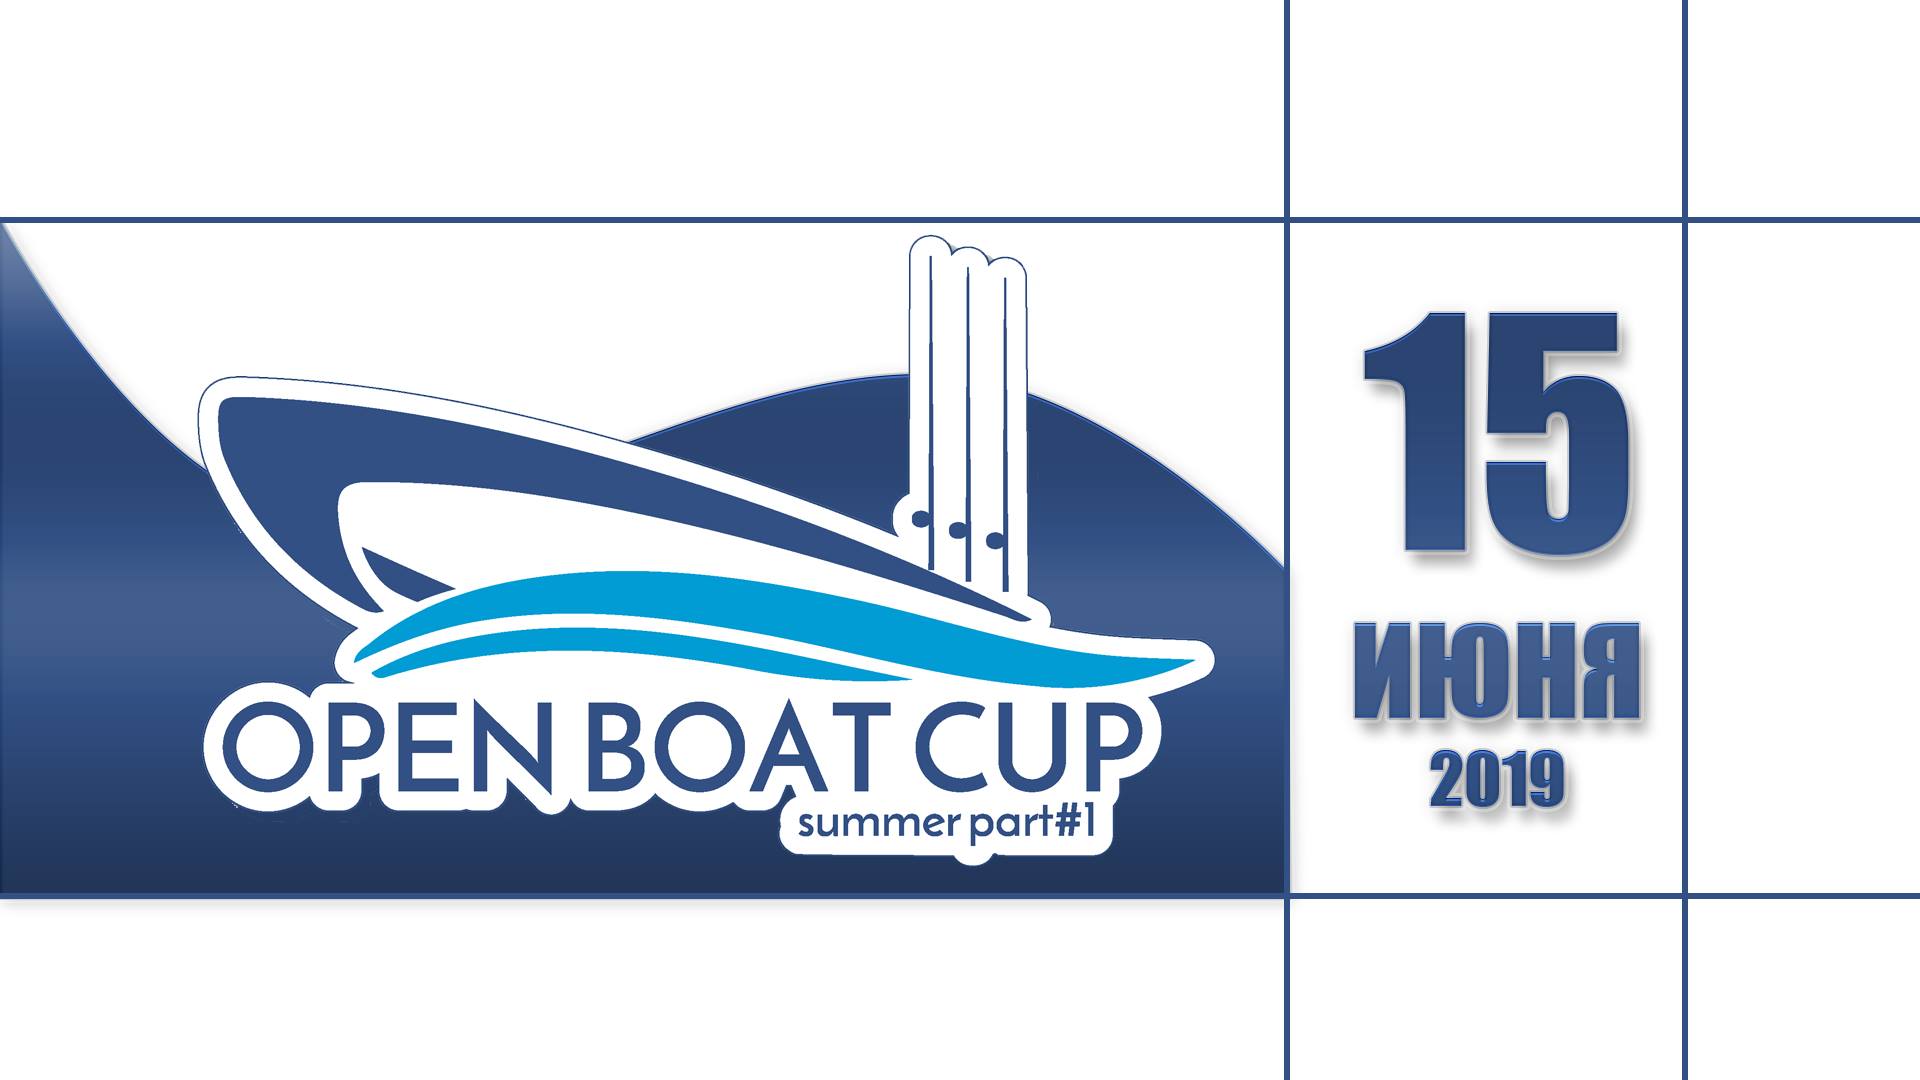 Open Boat Cup summer part #1